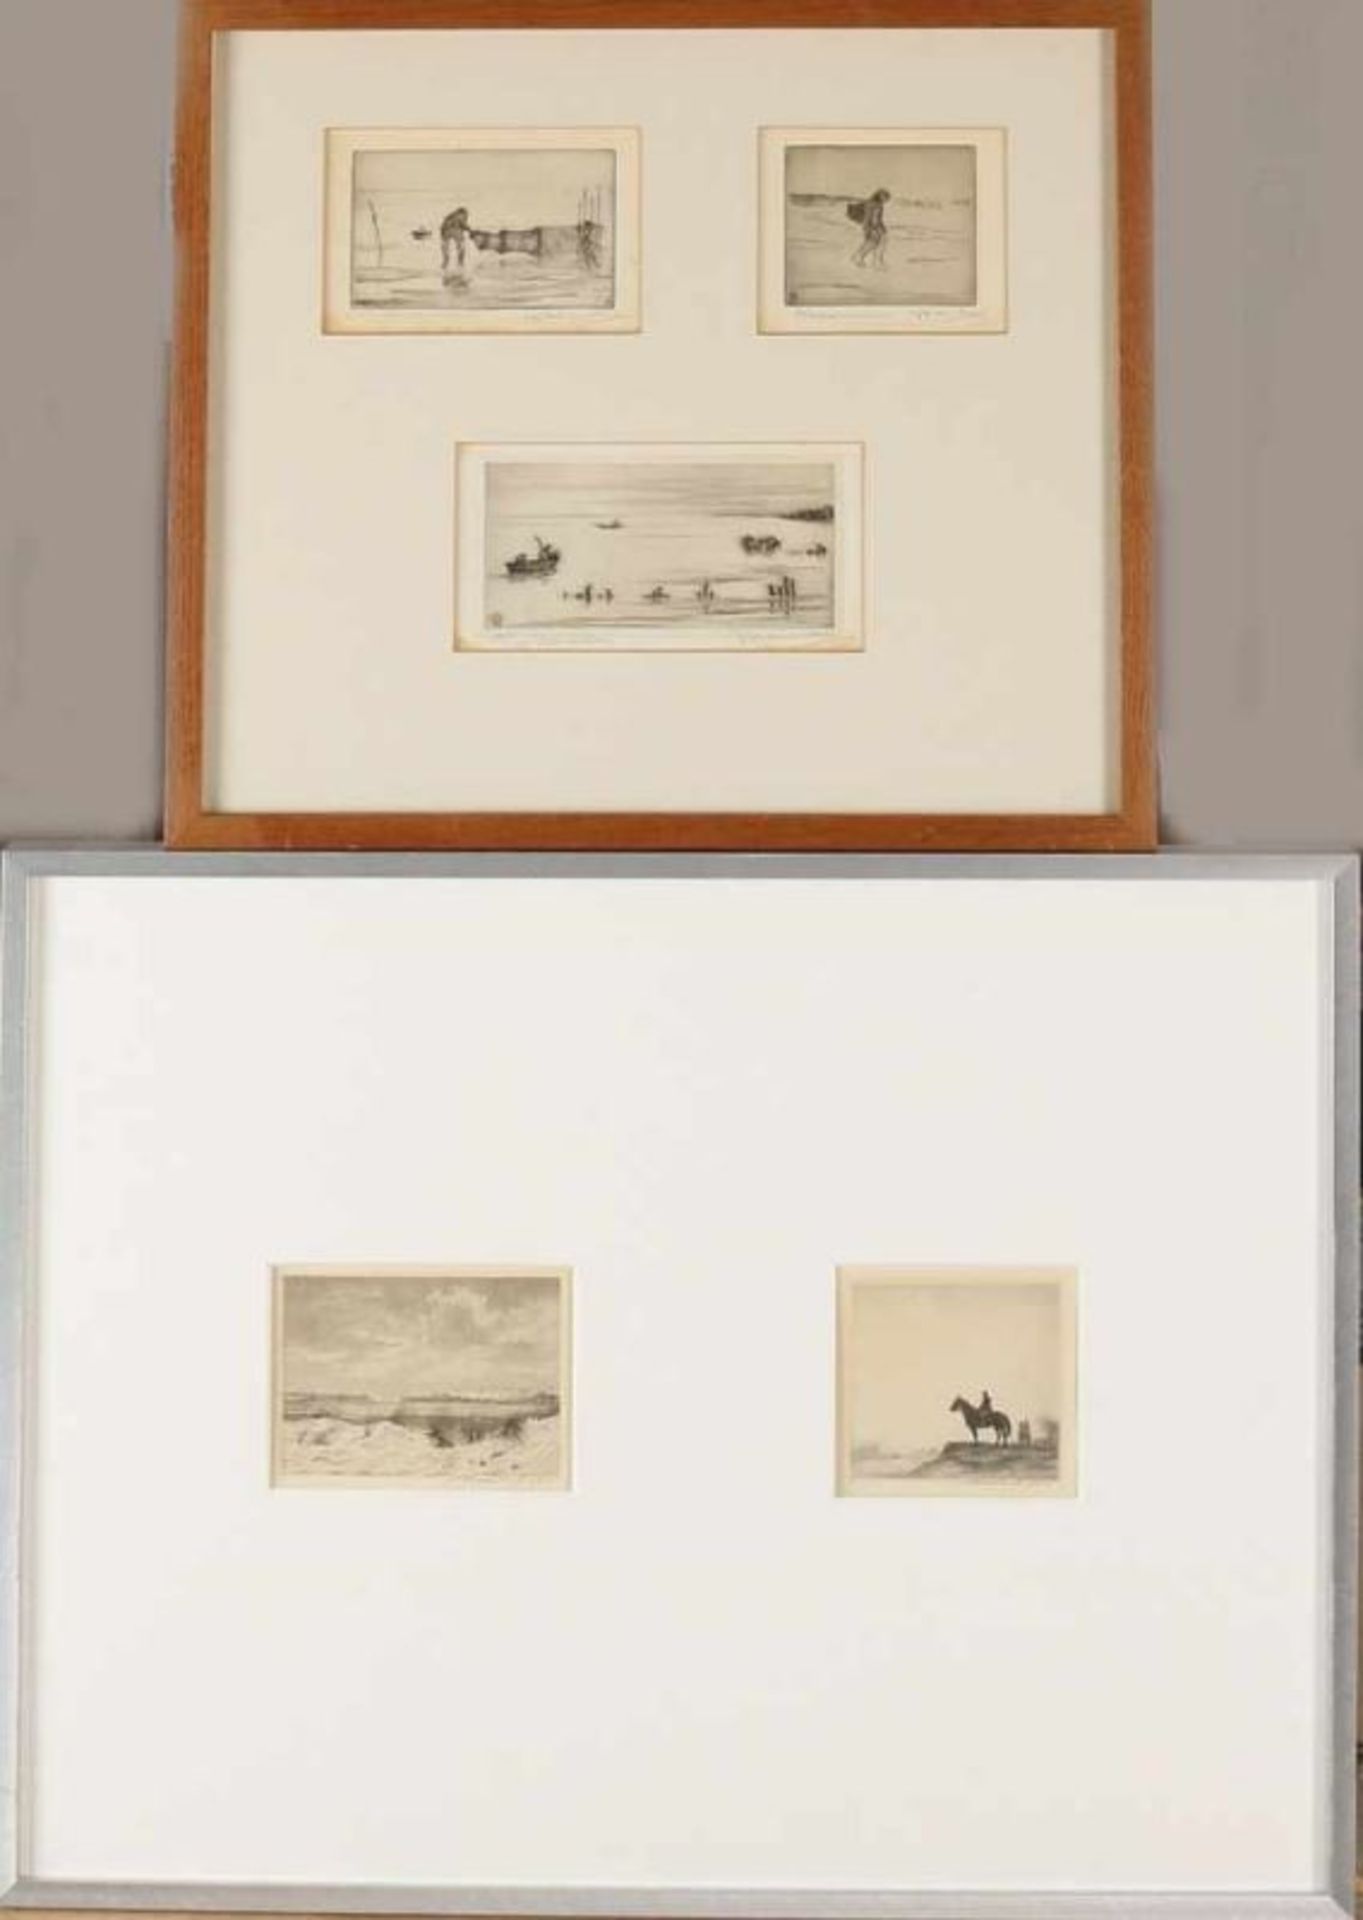 Five etching Johan Hemkes. 1894 - Wadden and dune faces. Etching on paper. Size: 9-15 cm. In good